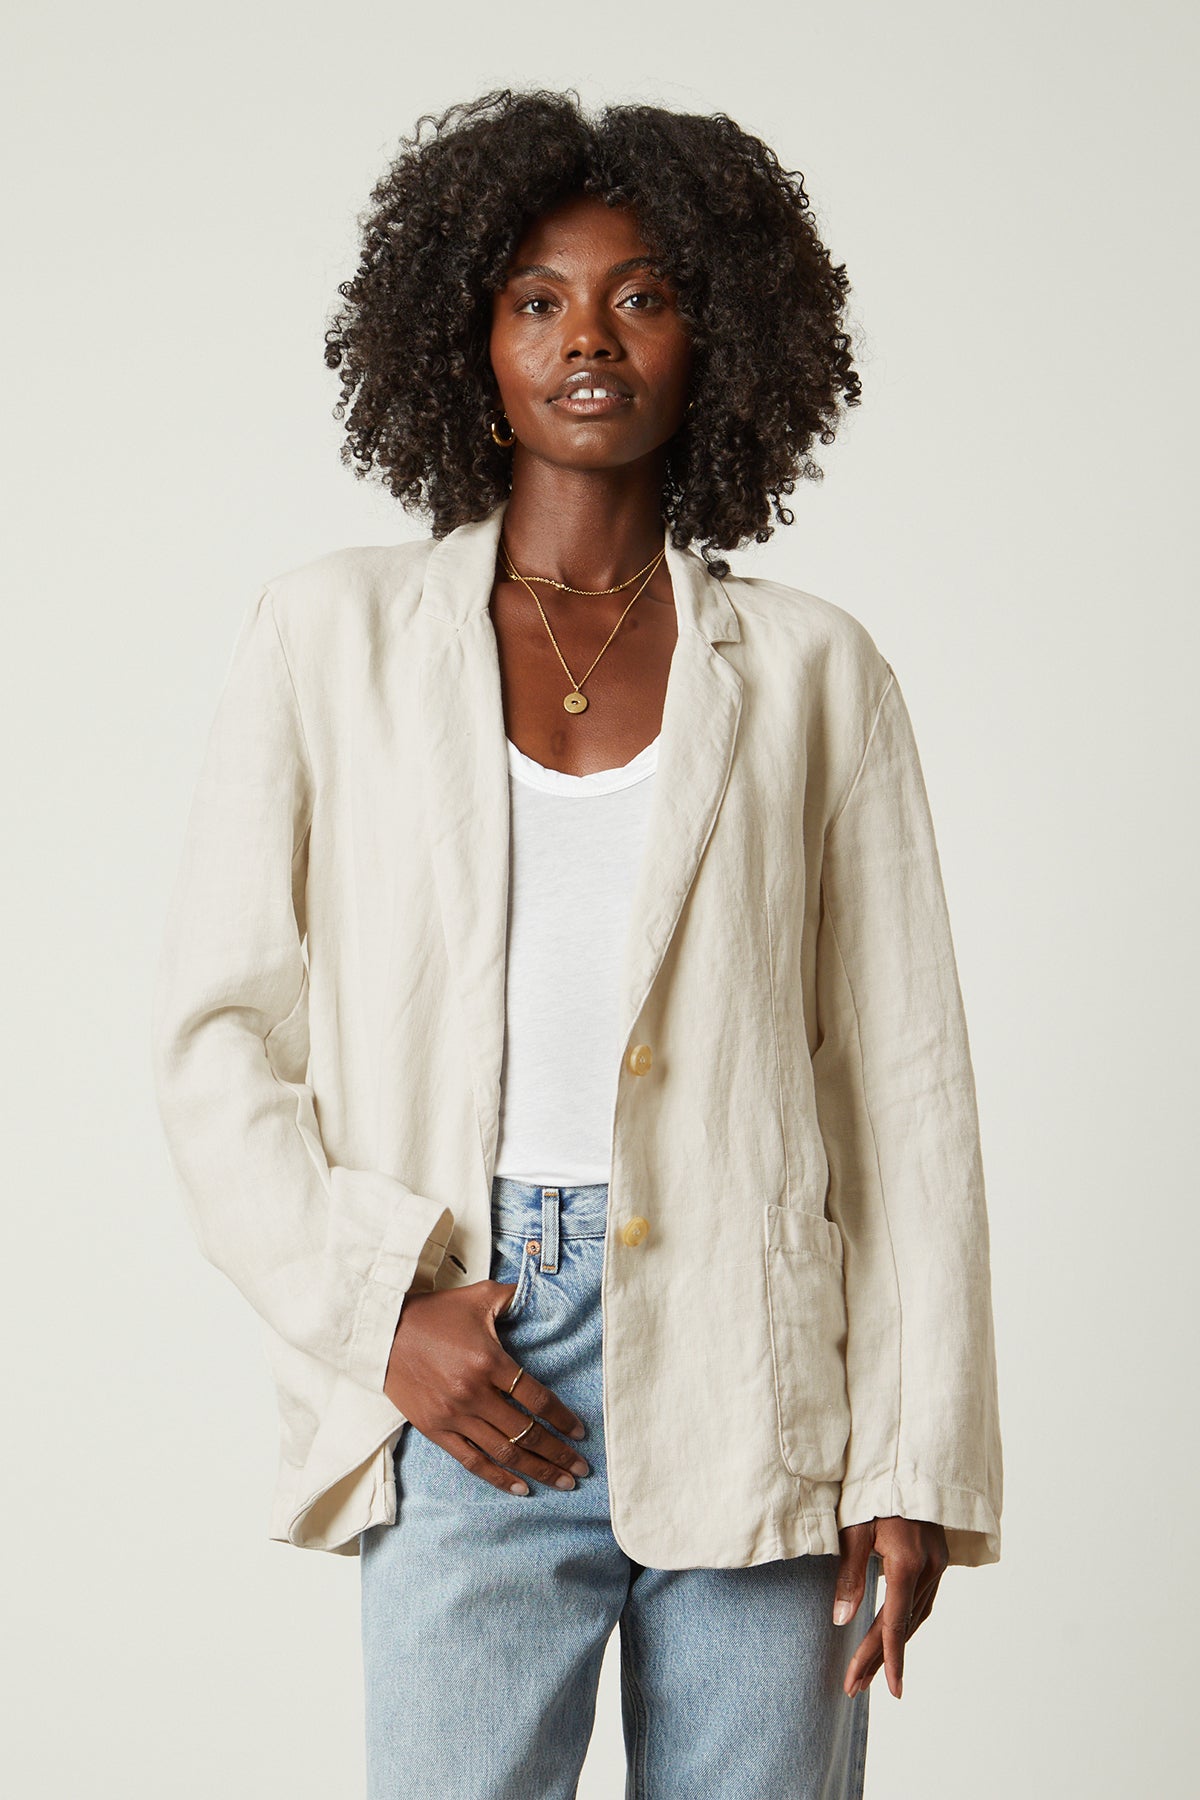 The model is wearing a CASSIE HEAVY LINEN BLAZER by Velvet by Graham & Spencer and jeans.-26215483769025